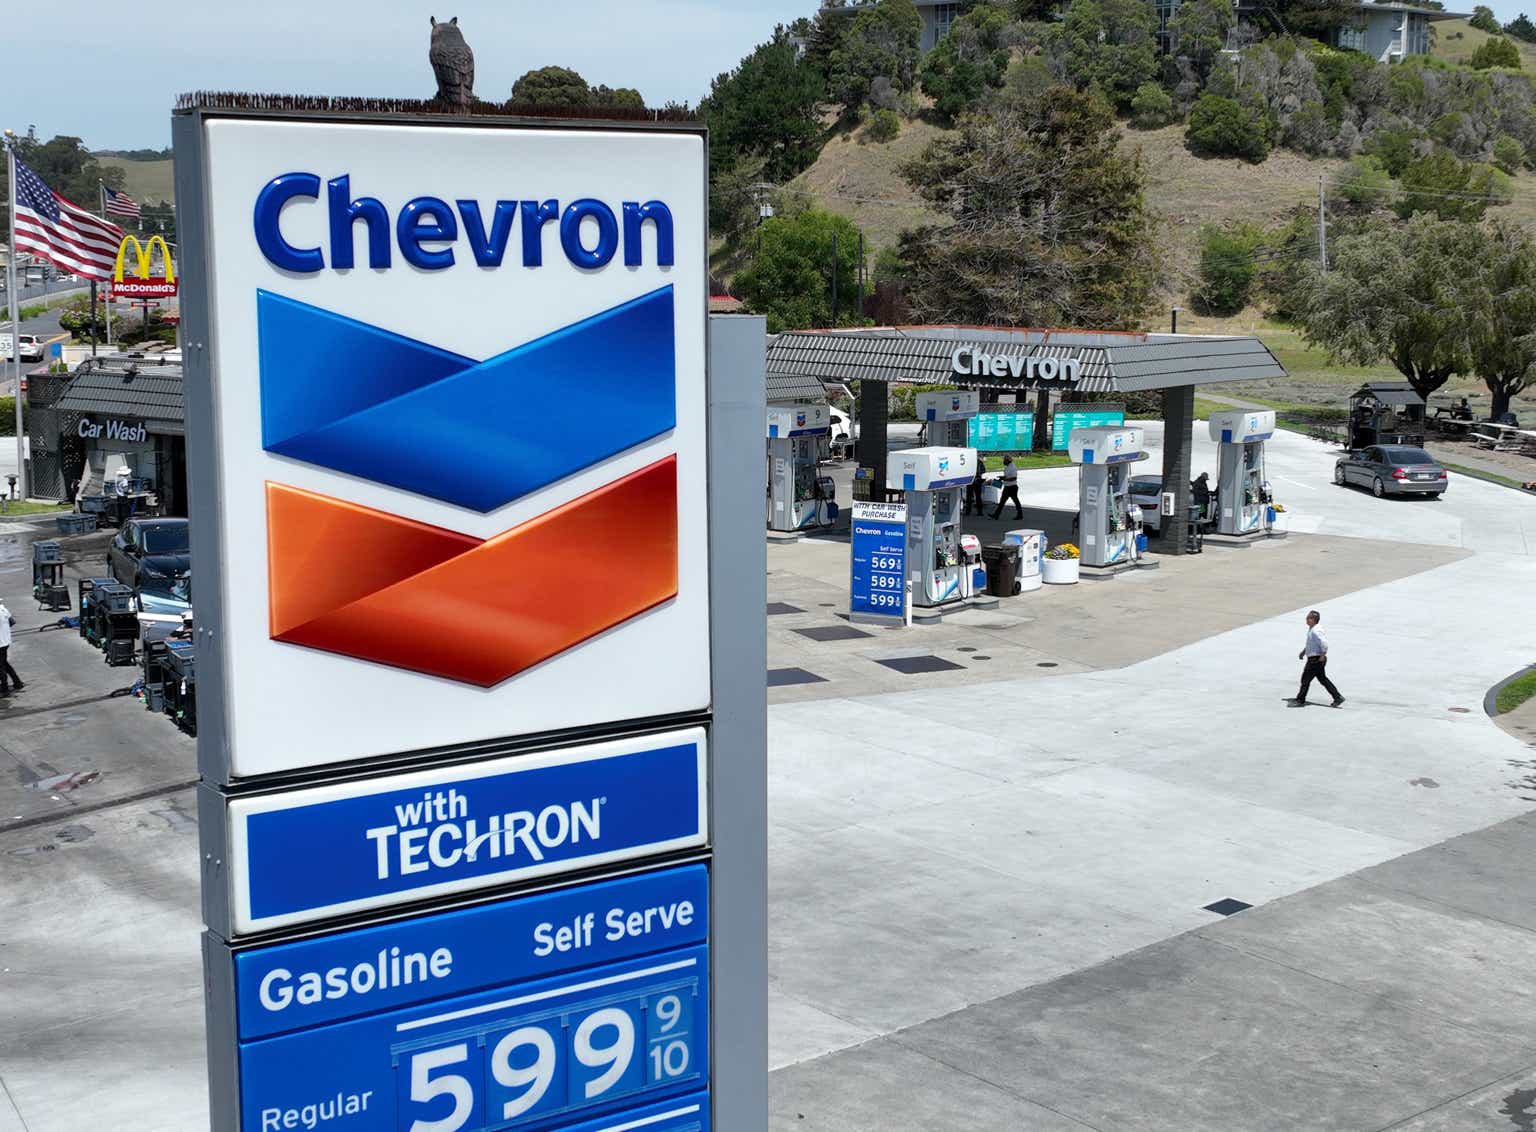 Chevron: Q4 Earnings Disappoints, Offset By Cash Returns